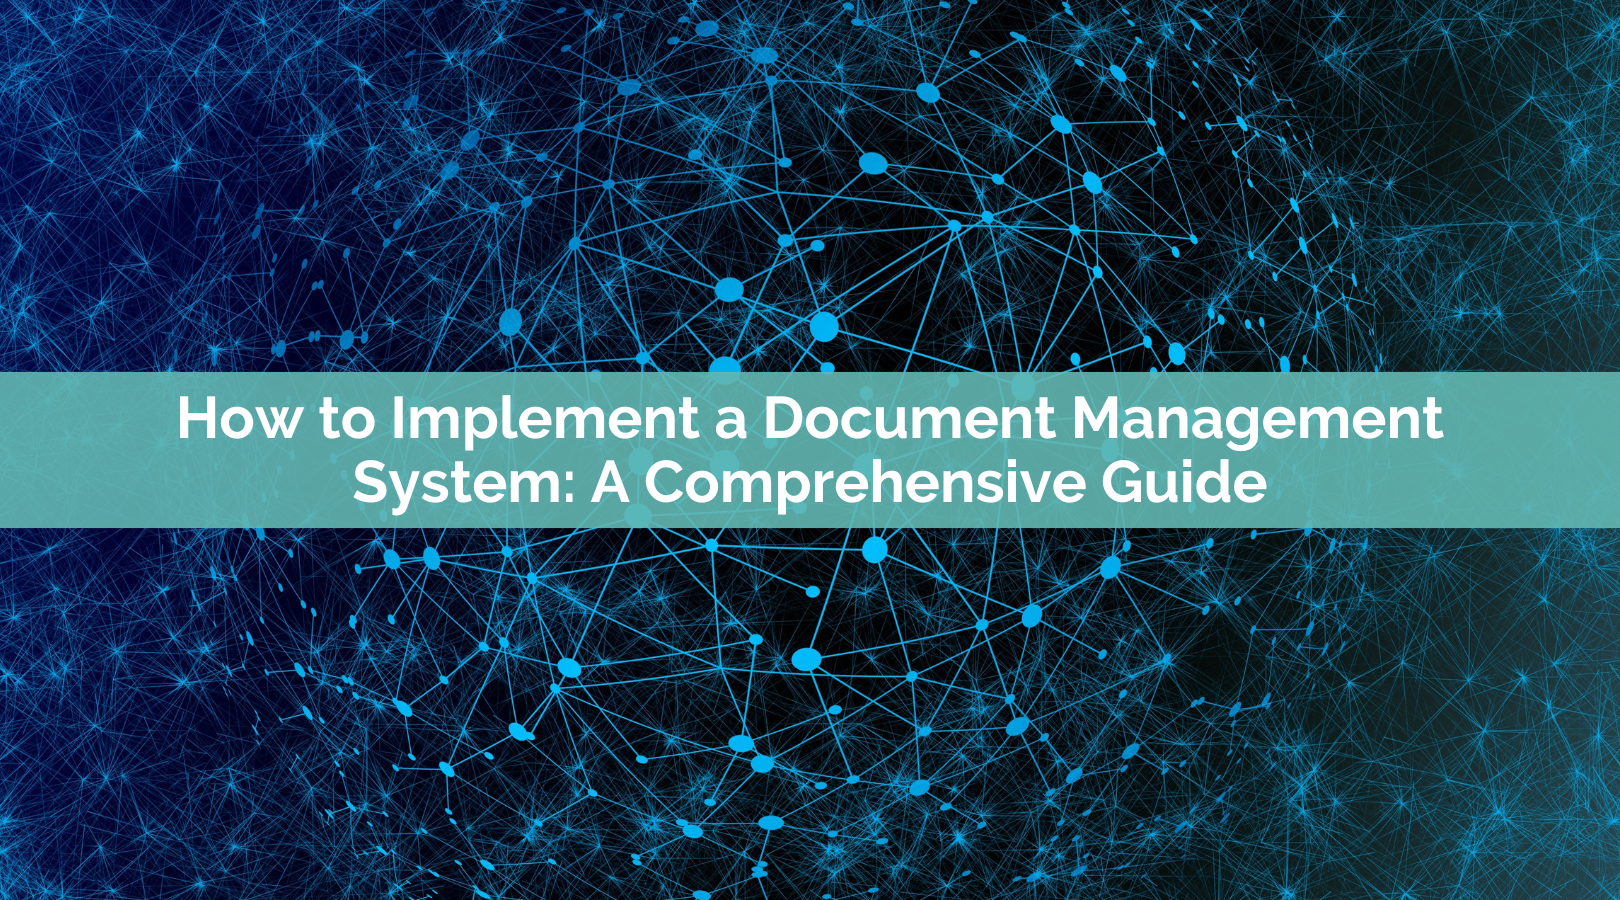 How to Implement a Cloud-Based Document Management System: A Comprehensive Guide